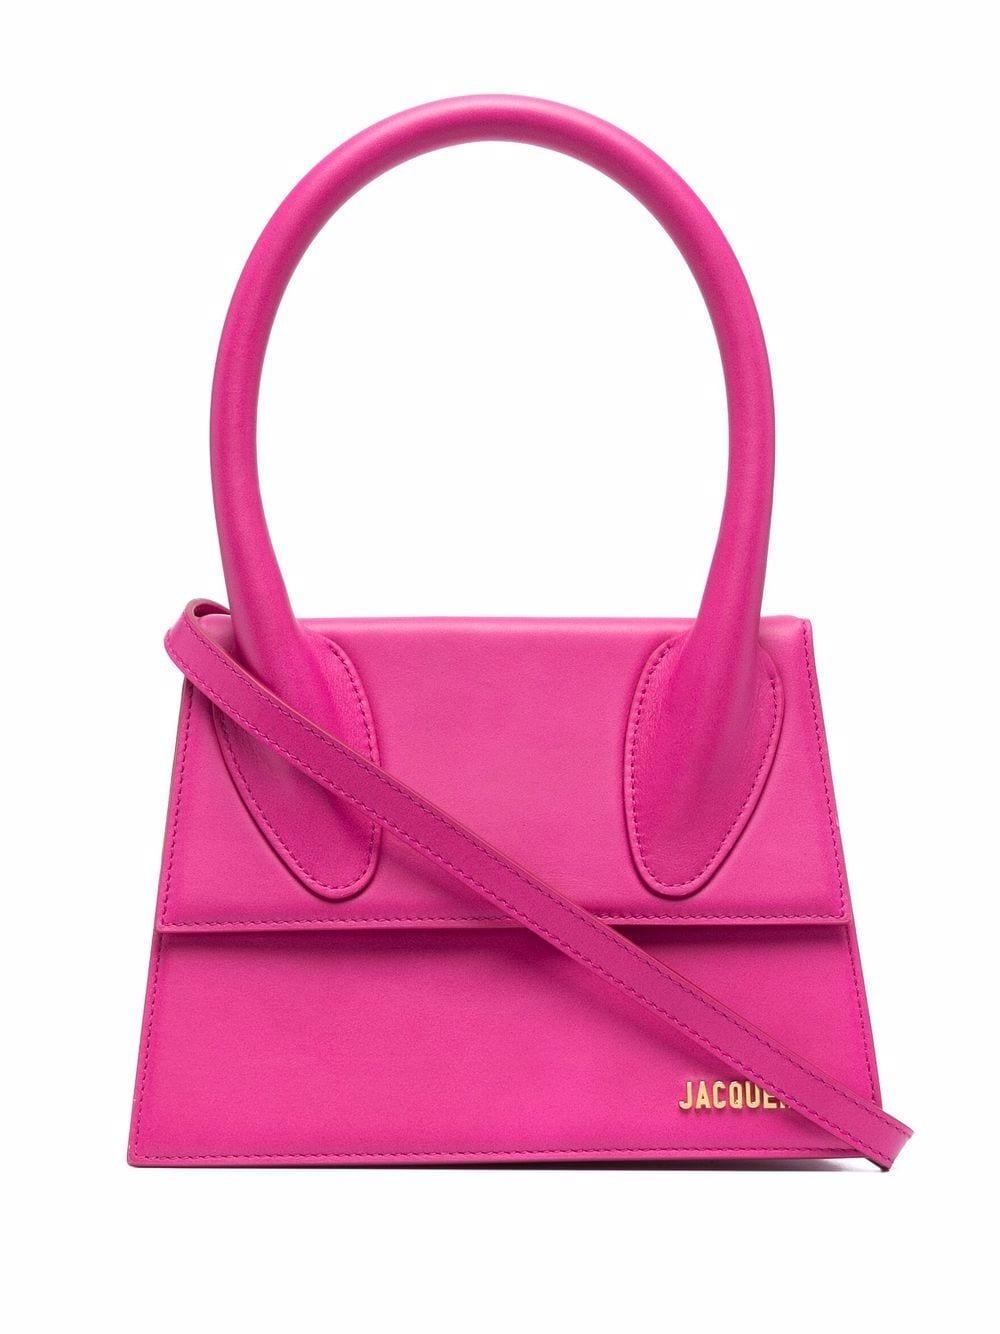 Jacquemus Le Grand Chiquito Tote Bag in Pink